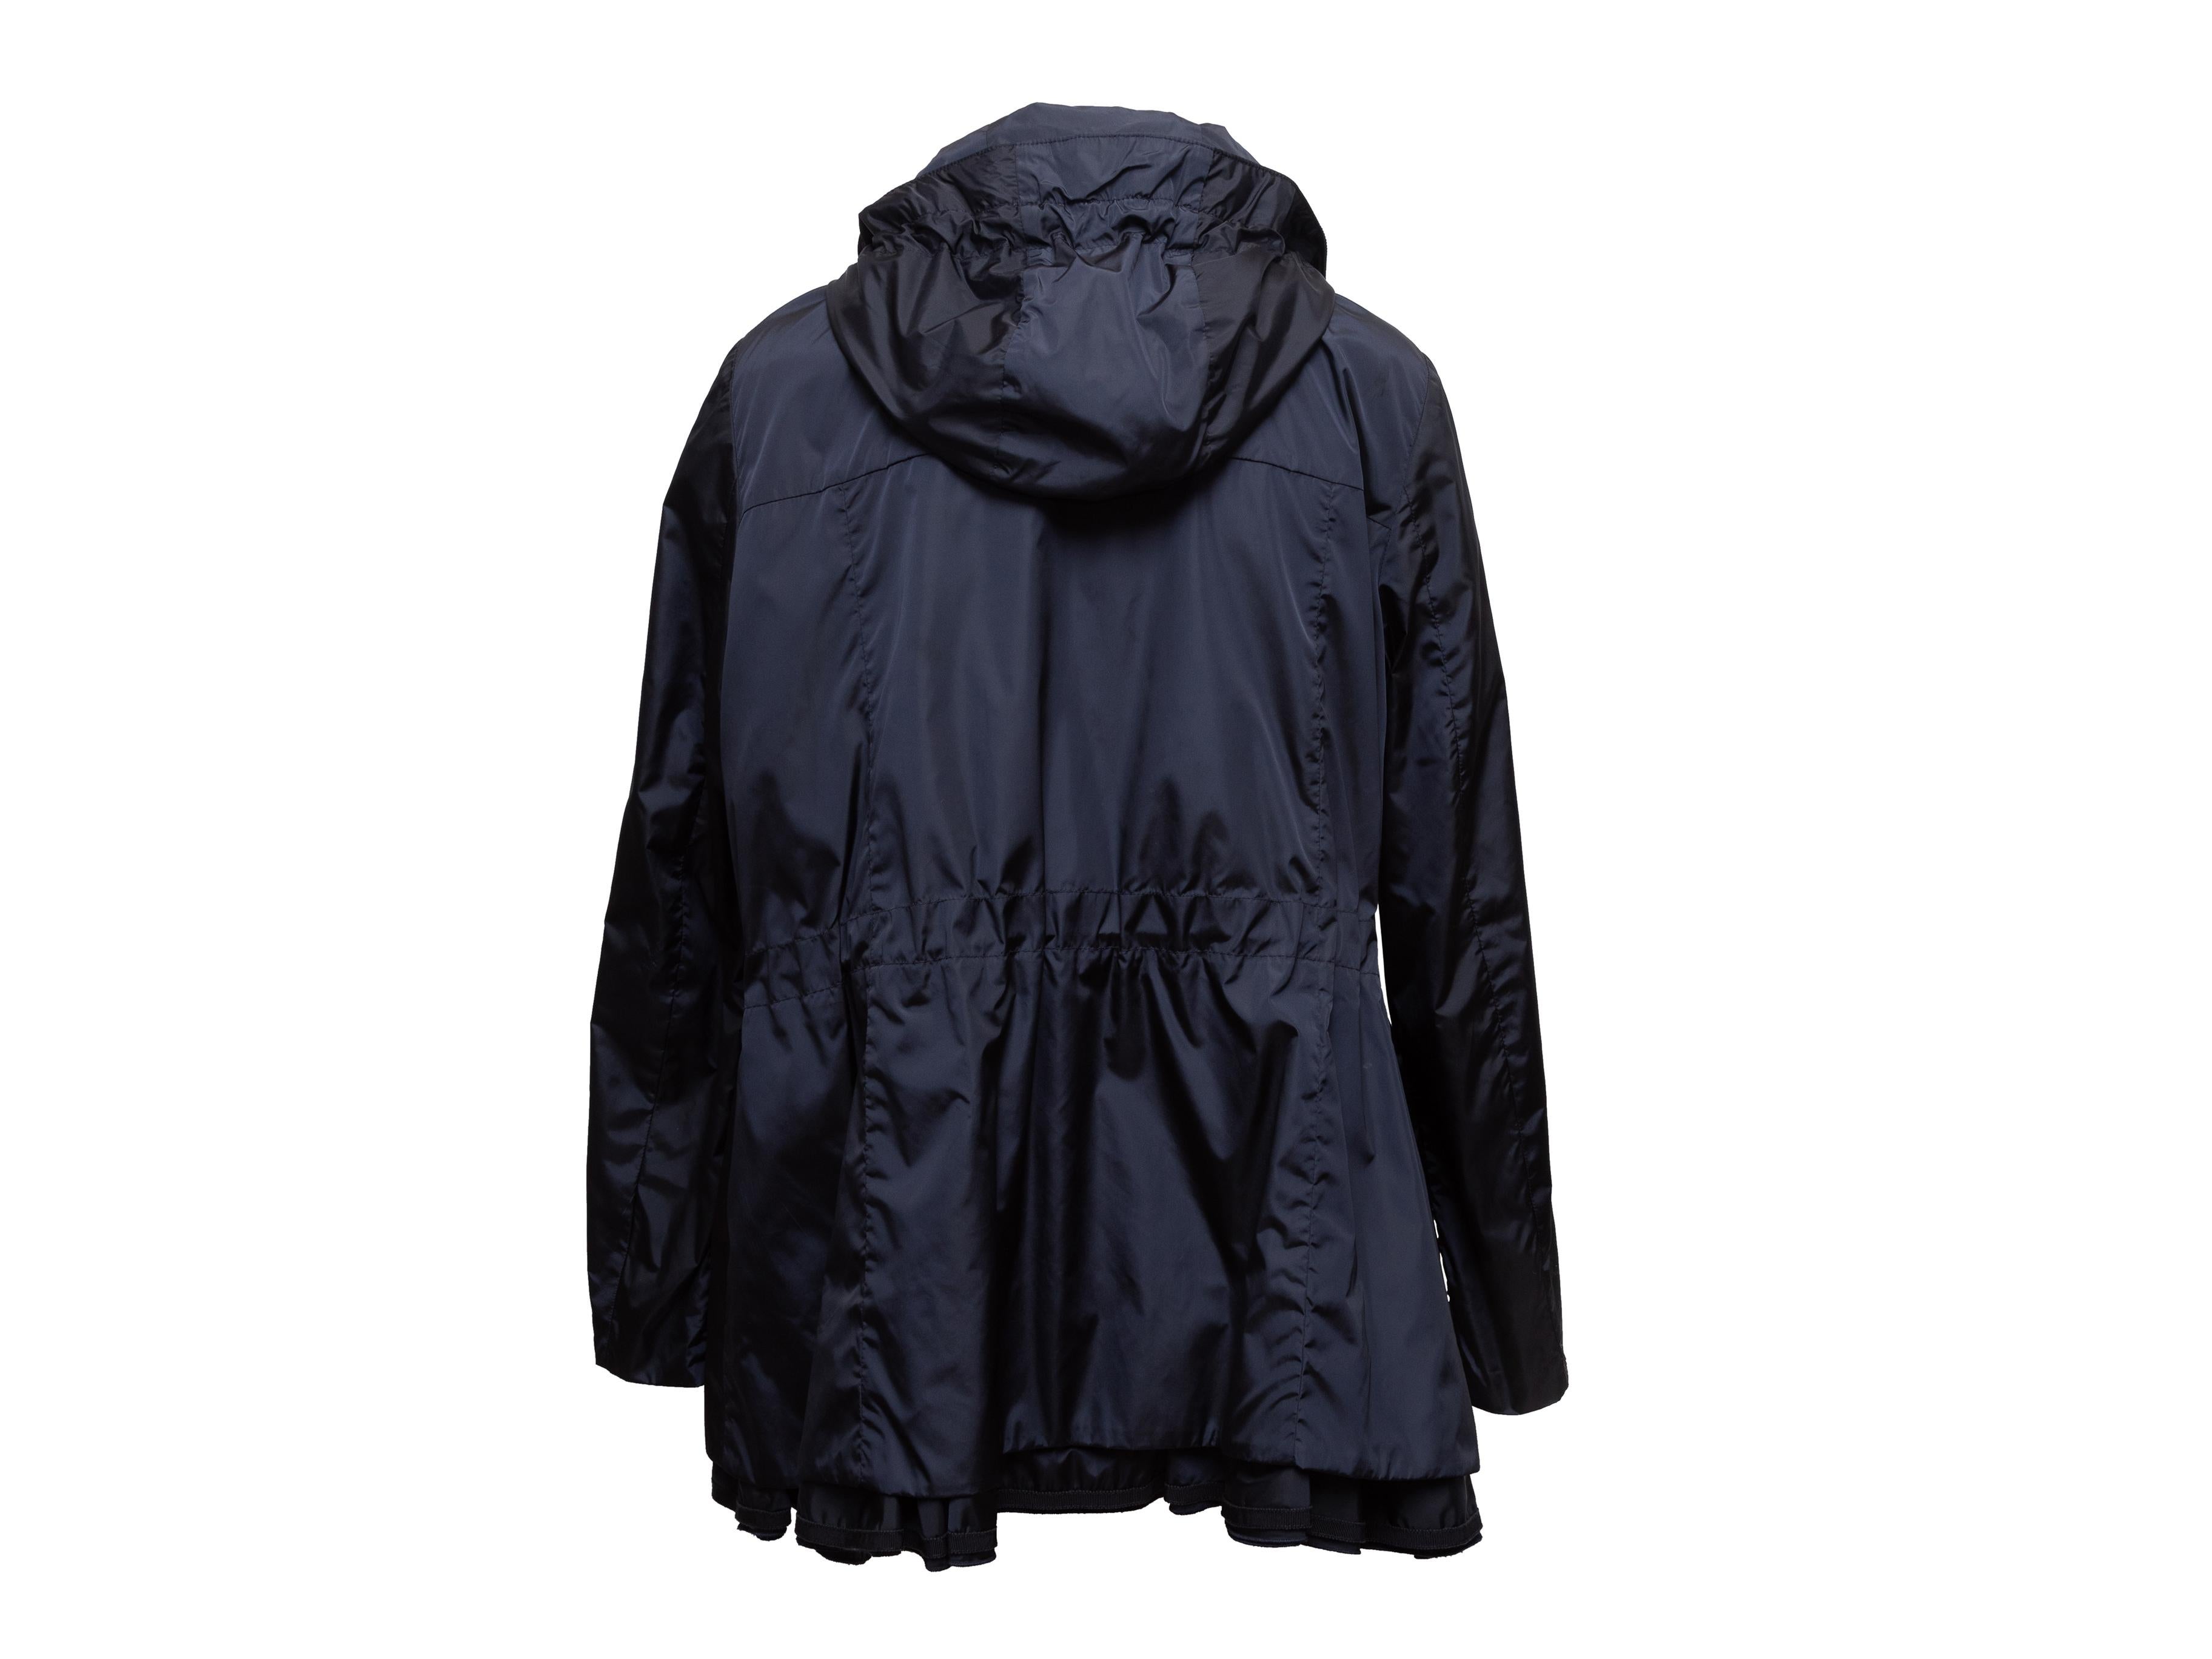 Navy hooded windbreaker jacket by Moncler. Dual flap pockets at hips. Front zip closure. Designer size 5. 44